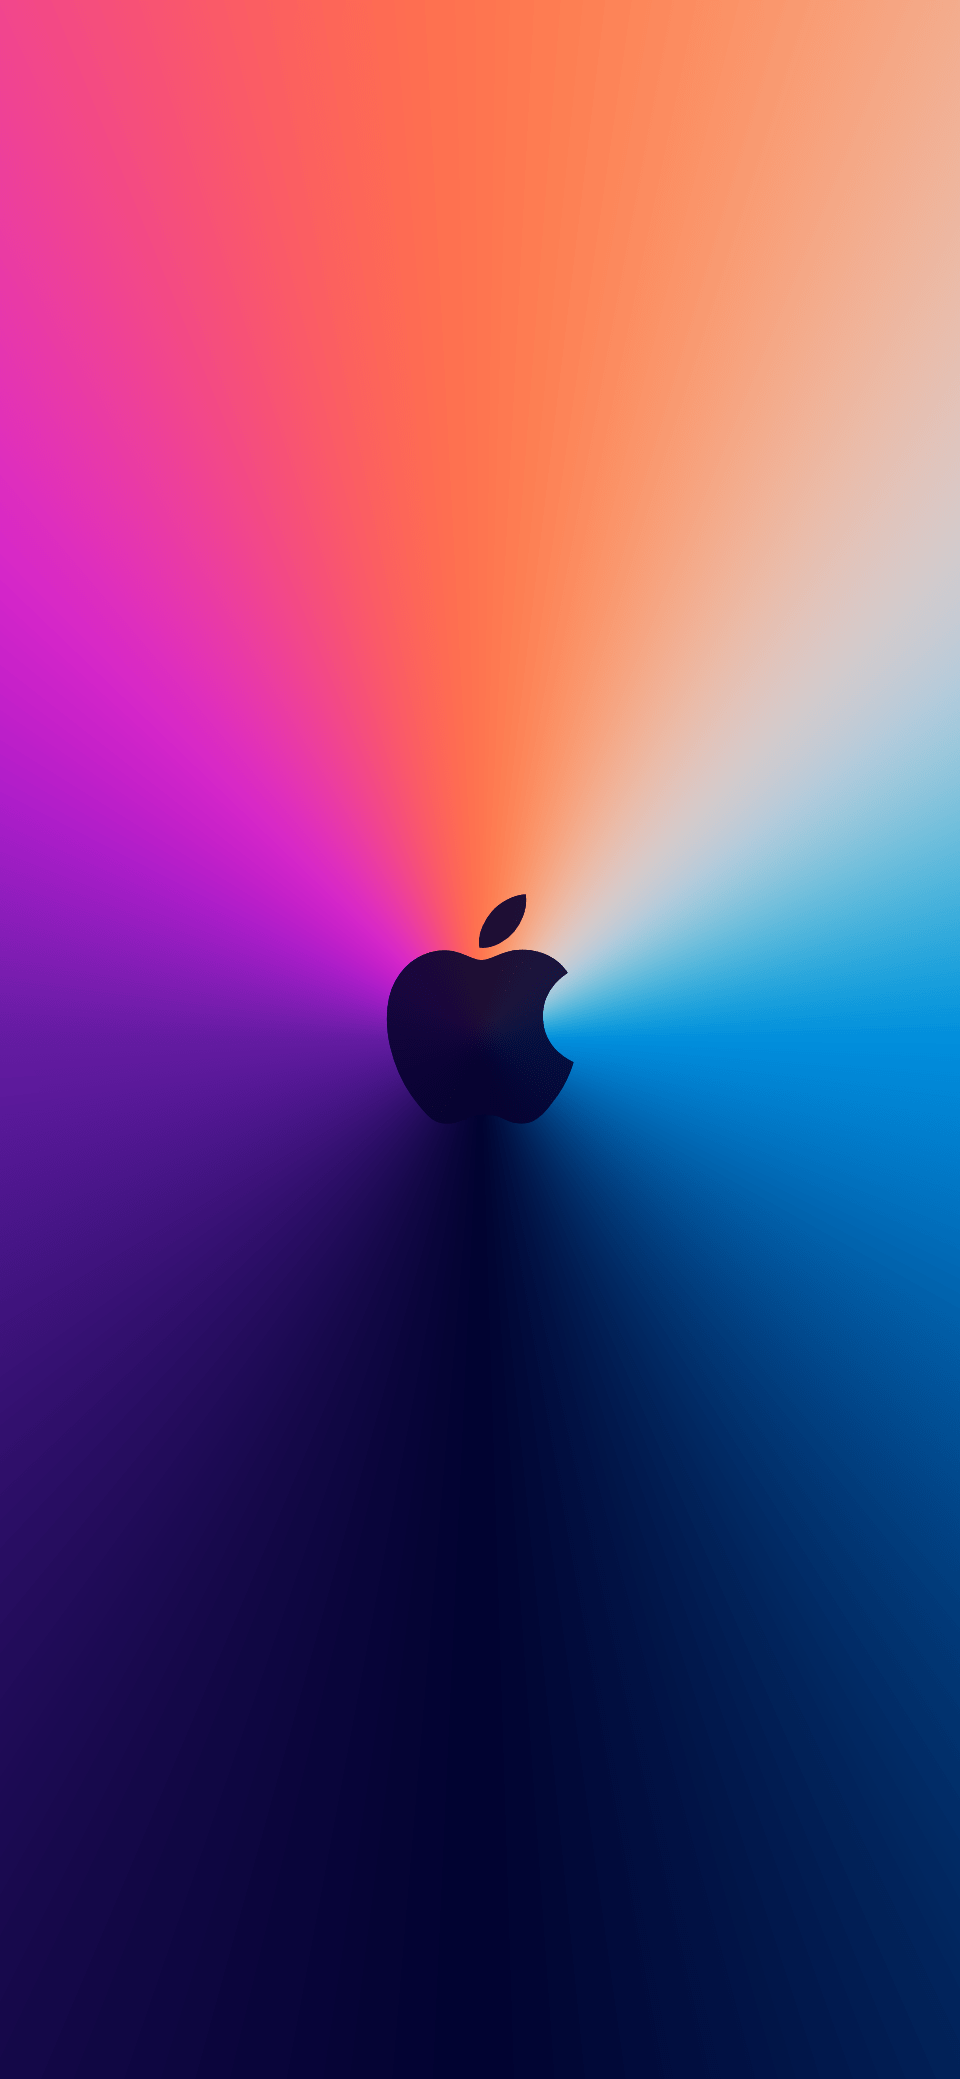 View 23 HD 4K Wallpaper For iPhone 12 Pro